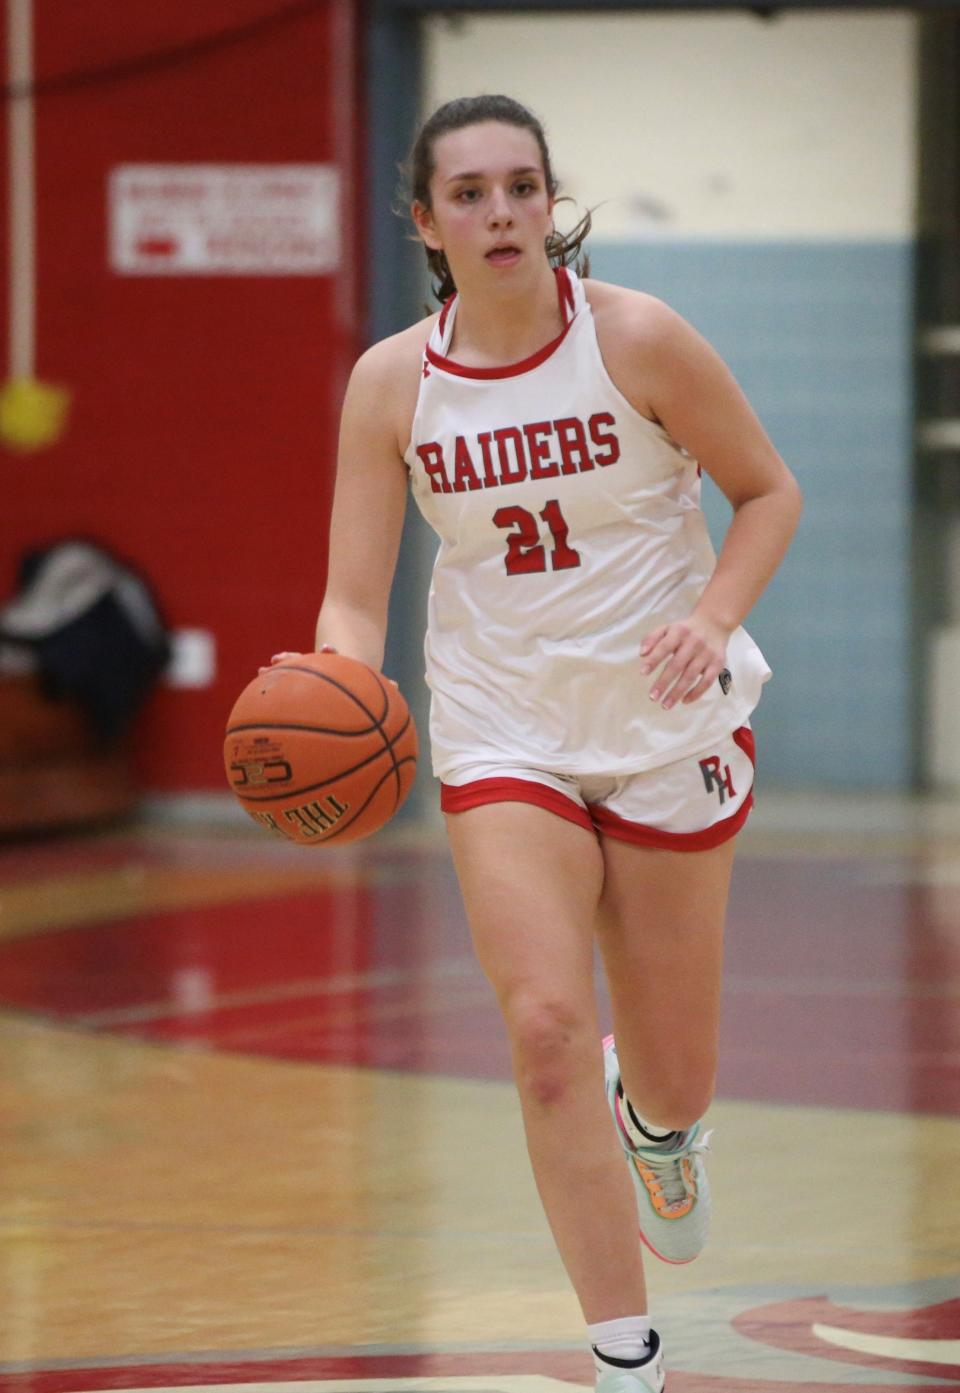 Emilie Kent, photographed during a Feb. 10, 2023 game, led the Red Hook girls basketball team to a win over Millbrook on Thursday.